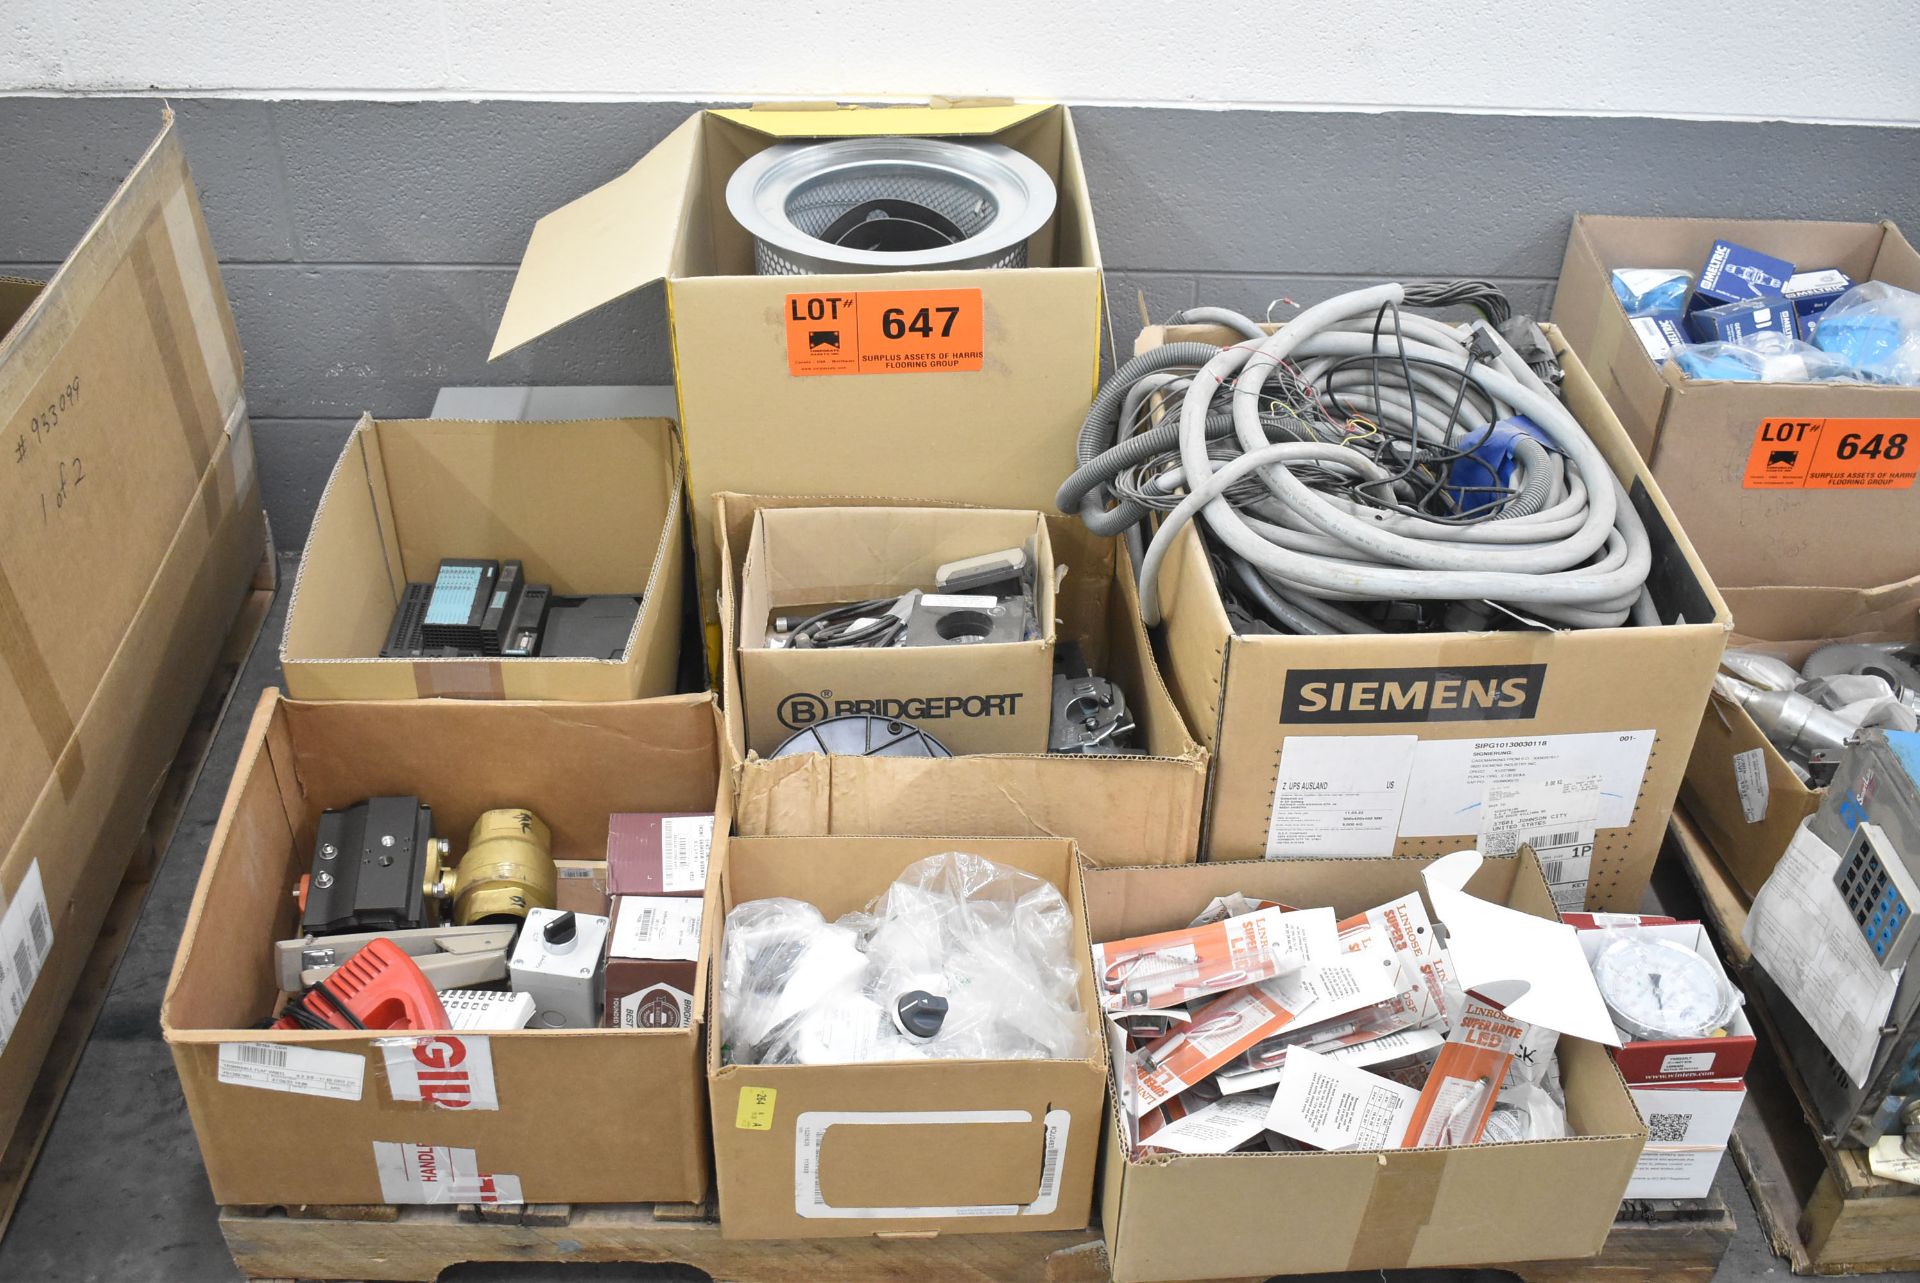 LOT/ SKID WITH CONTENTS - INCLUDING SPARE PARTS, AUTOMATION COMPONENTS, HARDWARE, ELECTRICAL